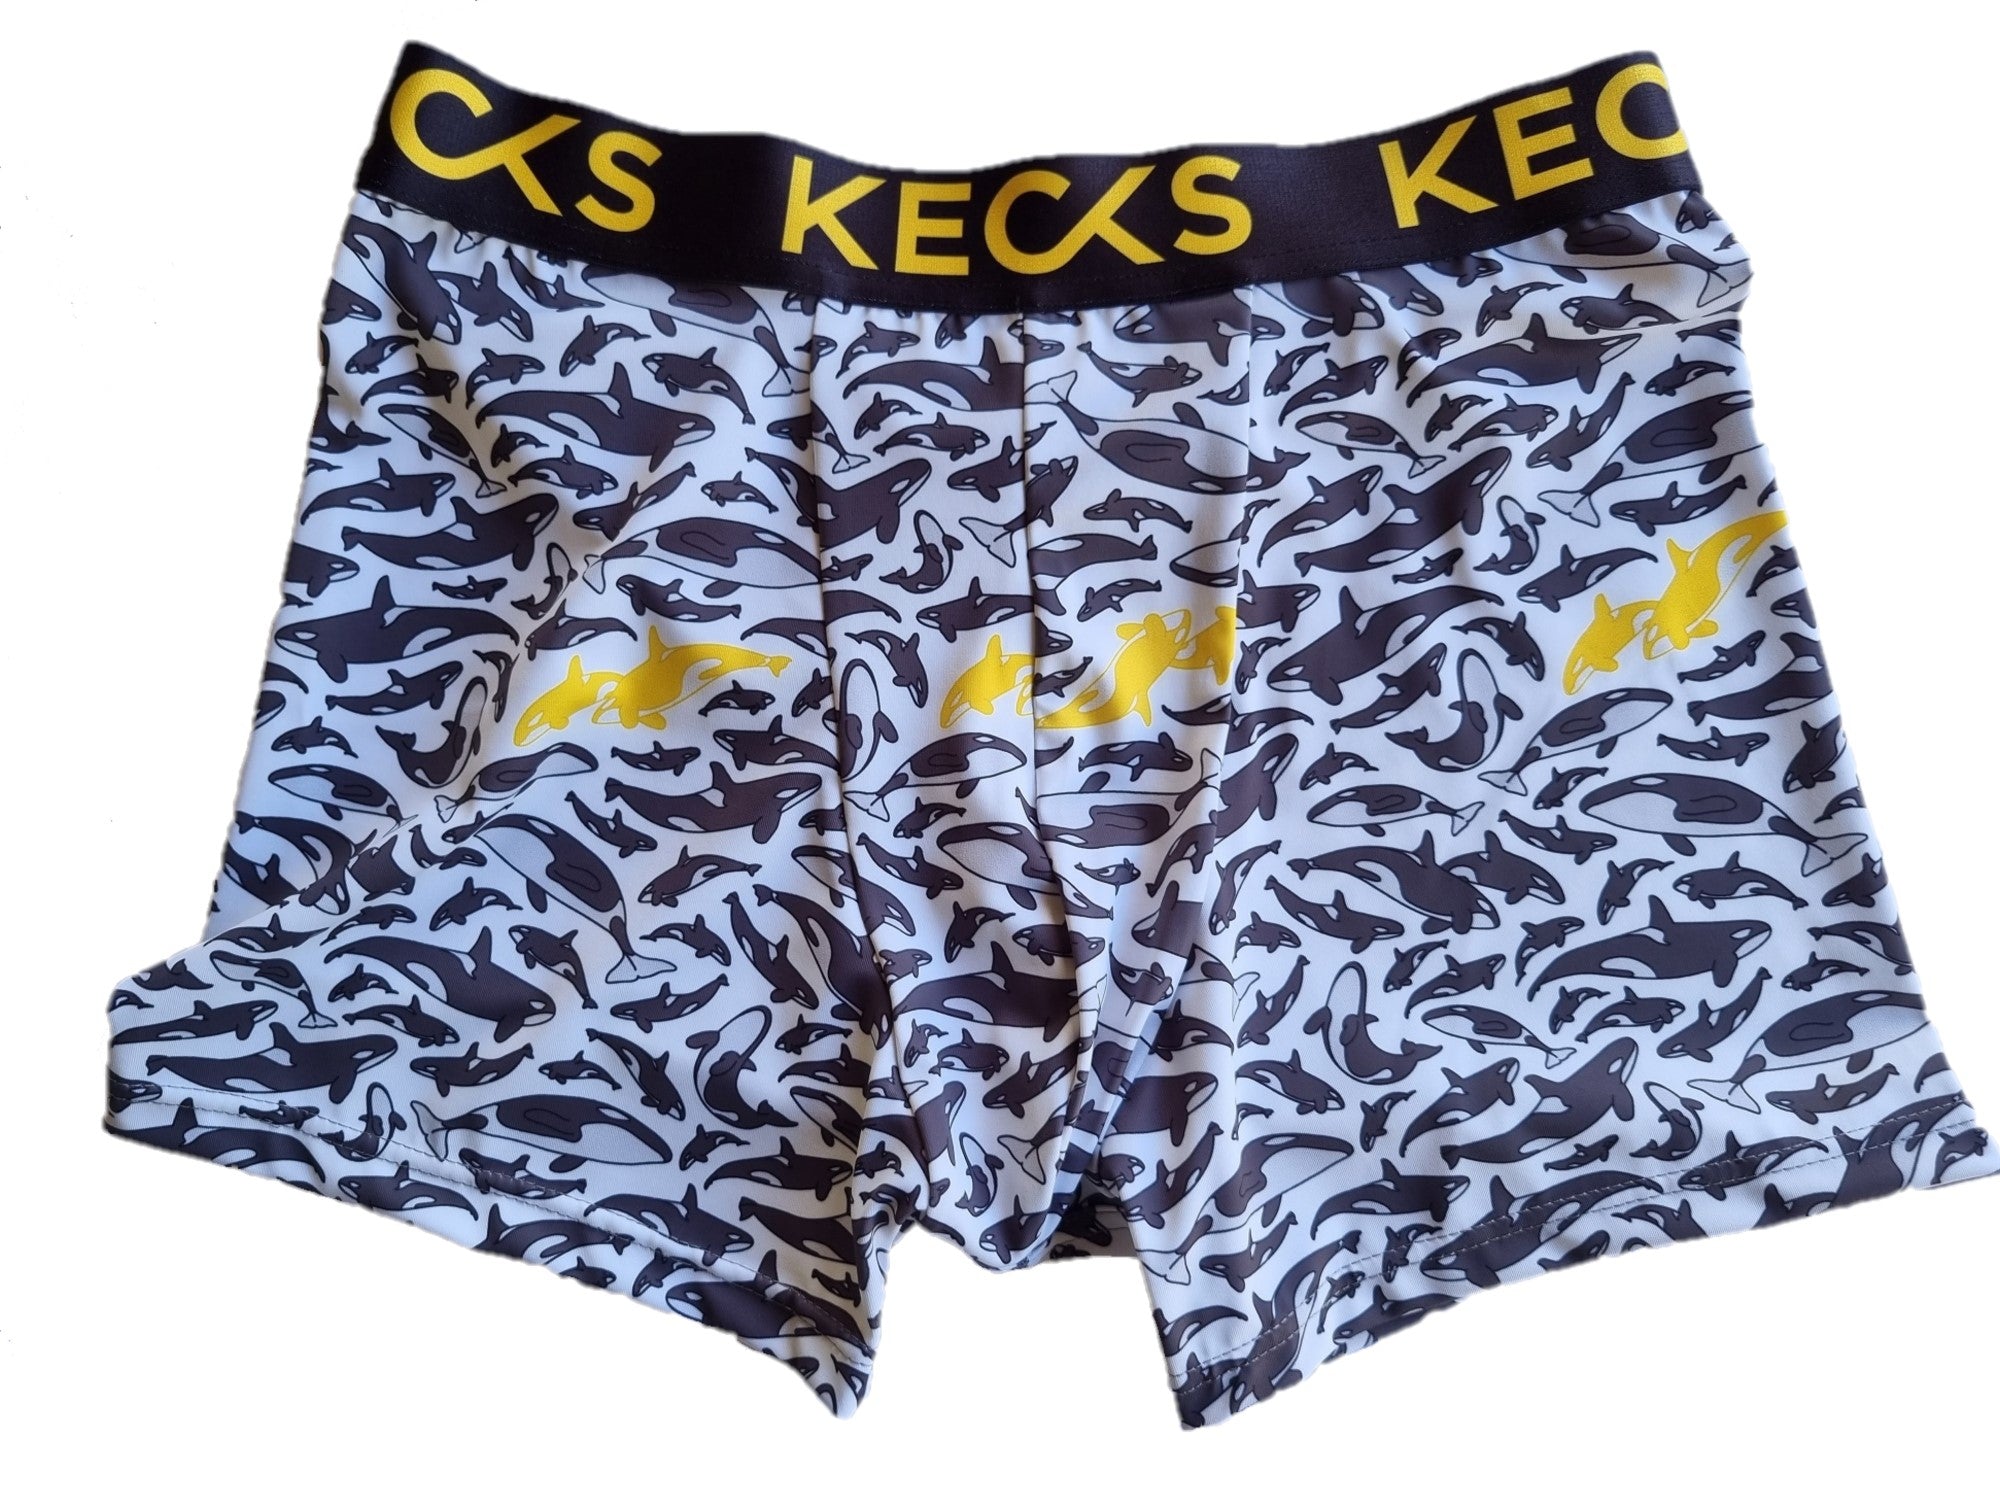 Kecks Mens sports underwear for anywhere - Anti-chafe - Quick Dry